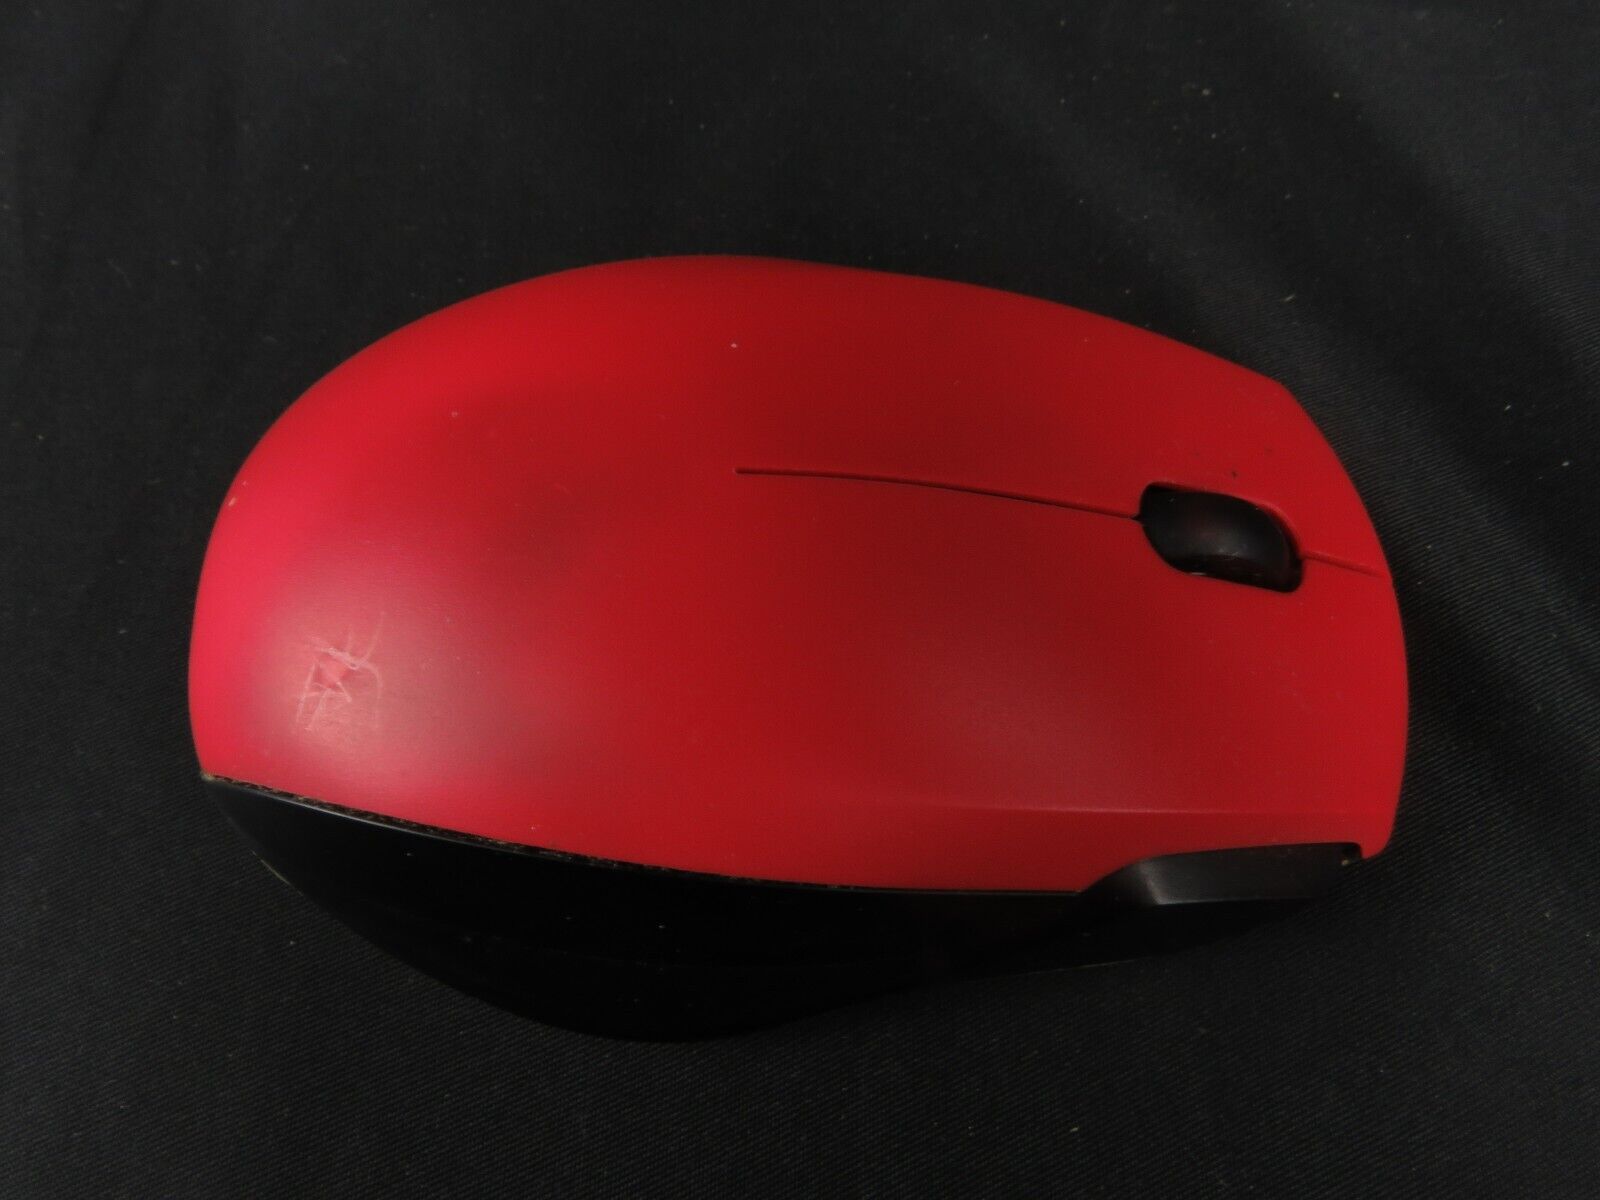 Insignia Wireless Optical Mouse NS-PWM3R - Black/Red, Tested